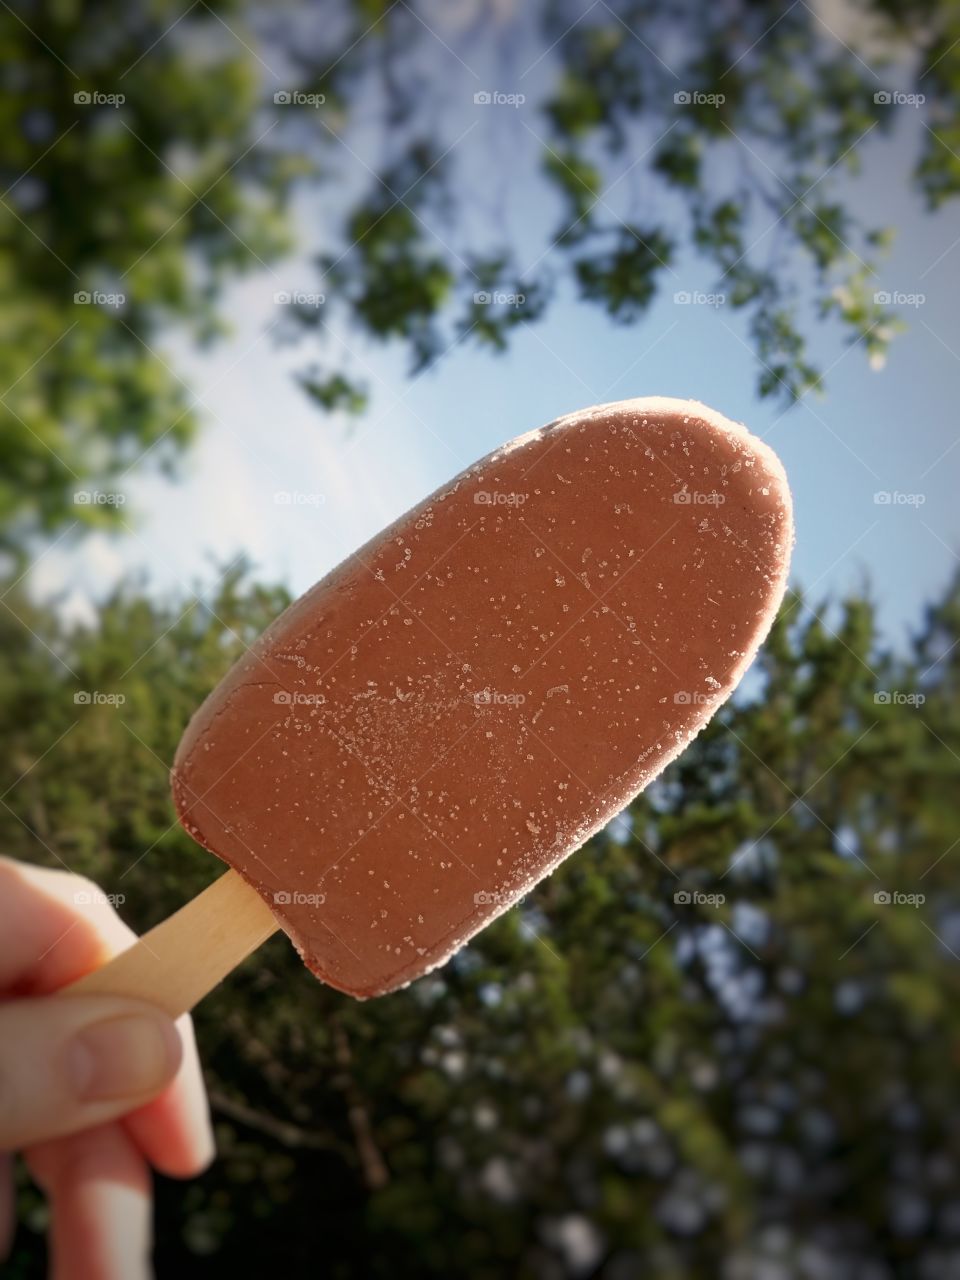 A hand holding a fudge ice cream bar  in summer with green trees and blue sky with ice crystals